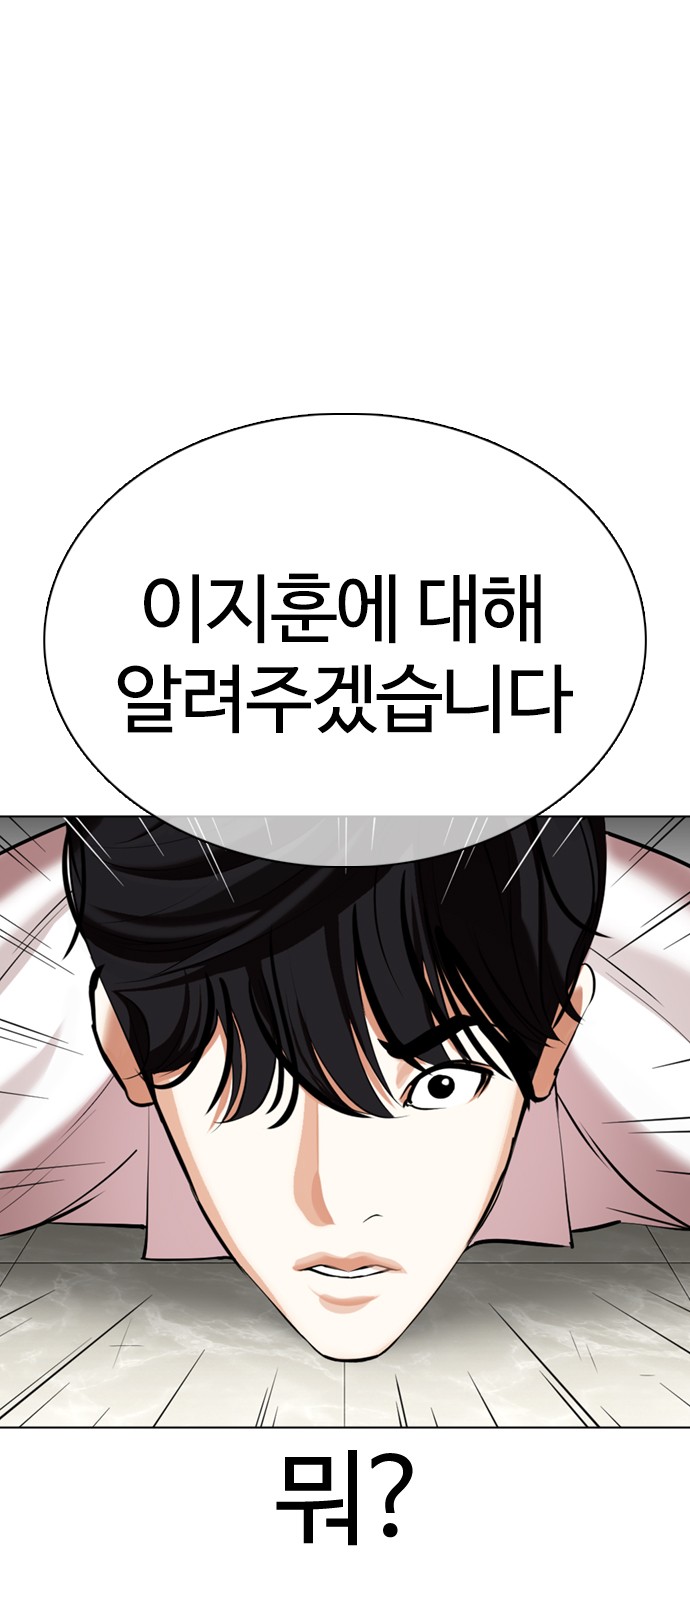 Lookism - Chapter 353 - Page 1